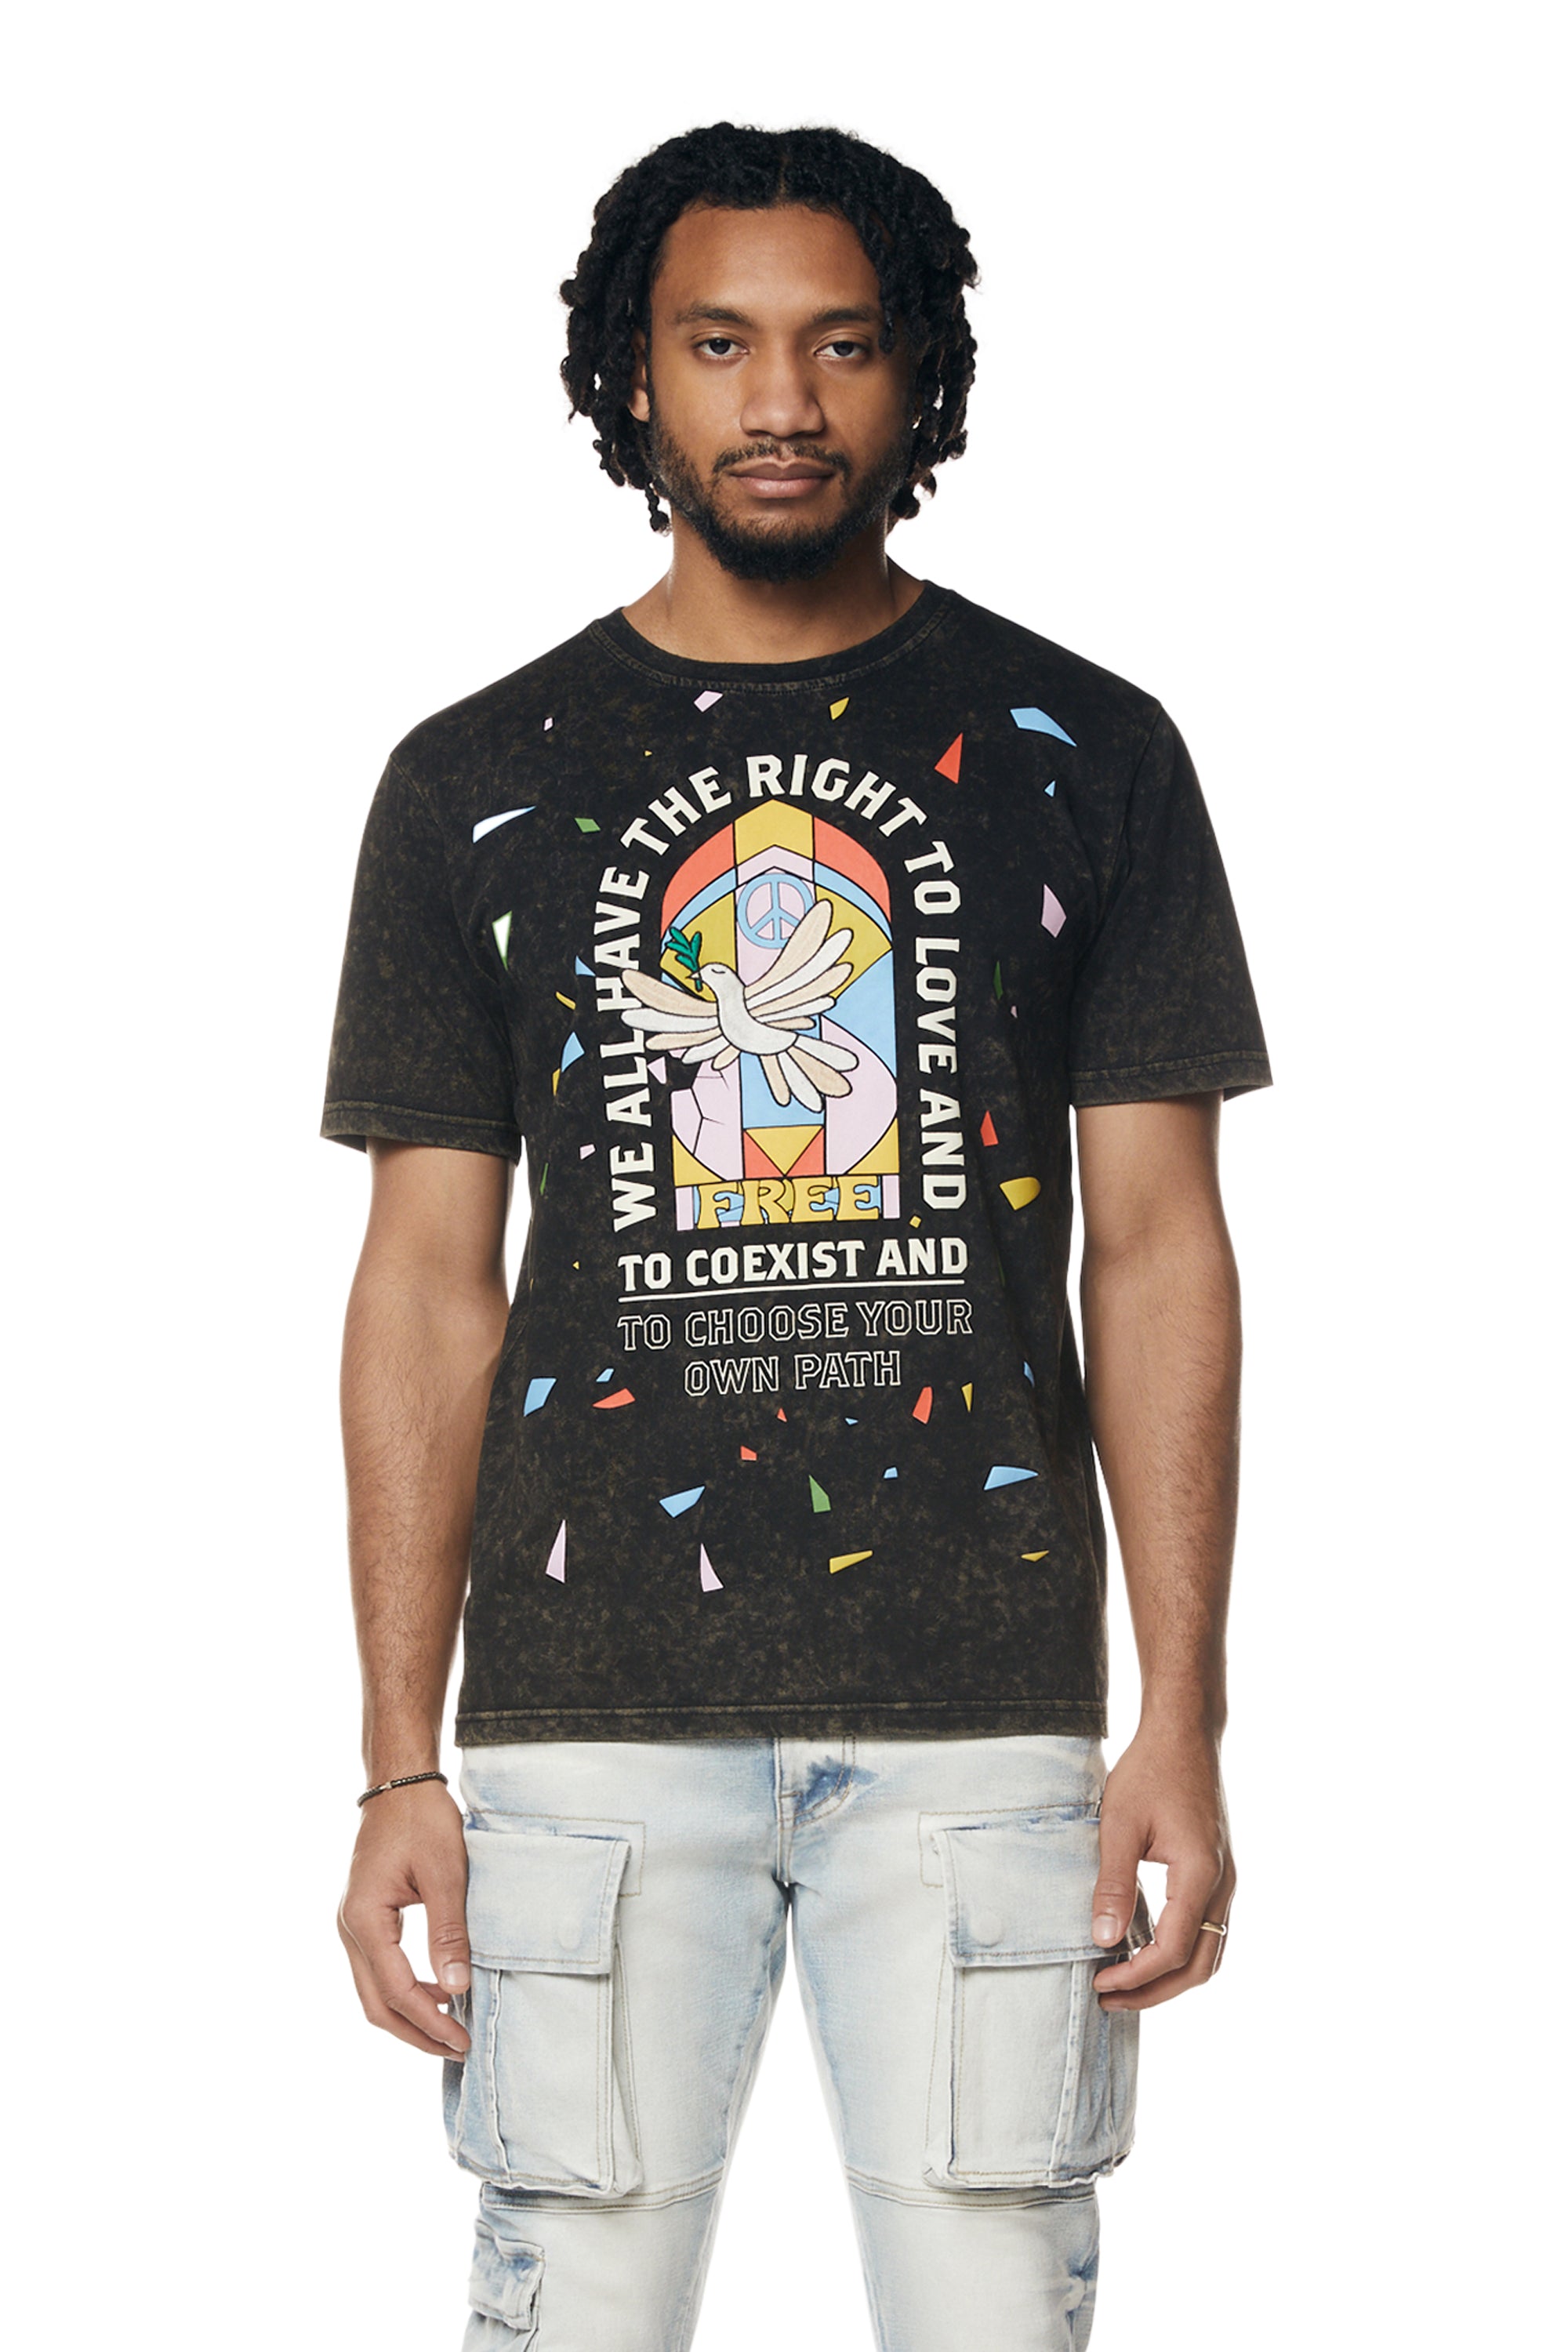 Embroidered Patched & Graphic Printed T-Shirt - Black